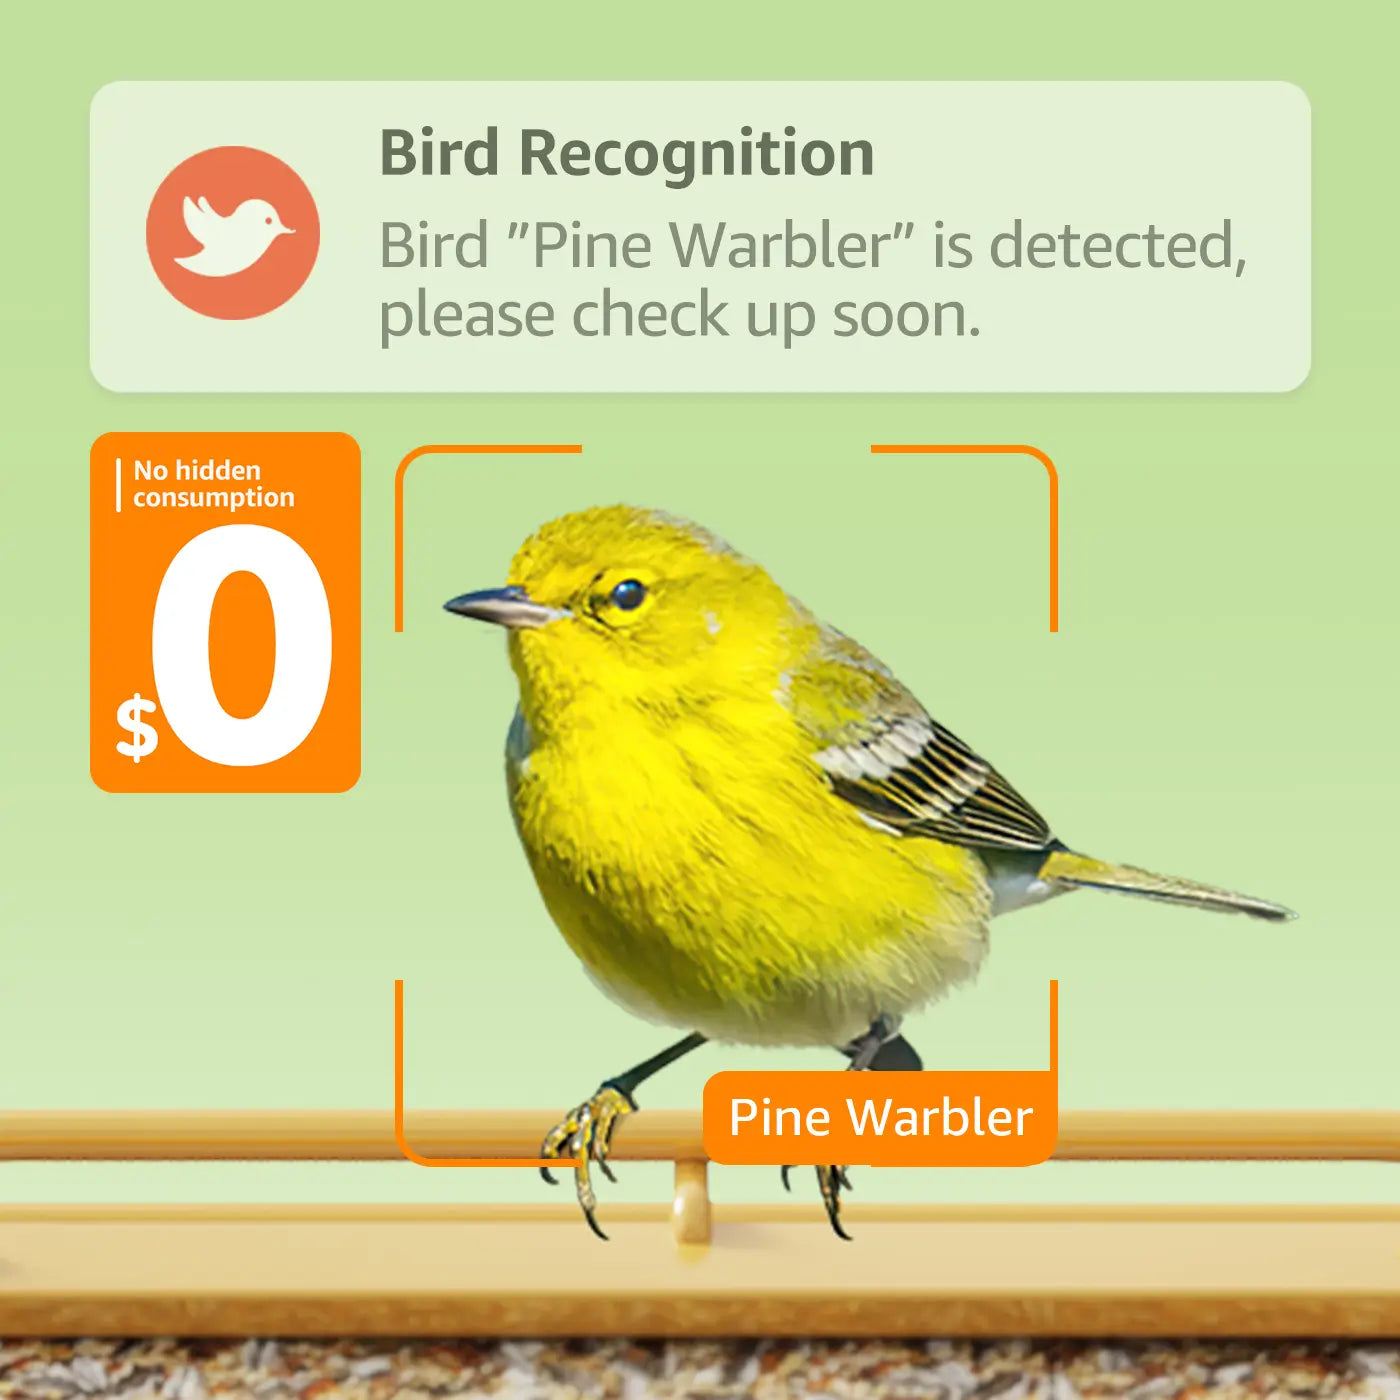 More powerful AI bird recognition. Explore almost every species of bird. Lifetime FREE! No hidden consumption.